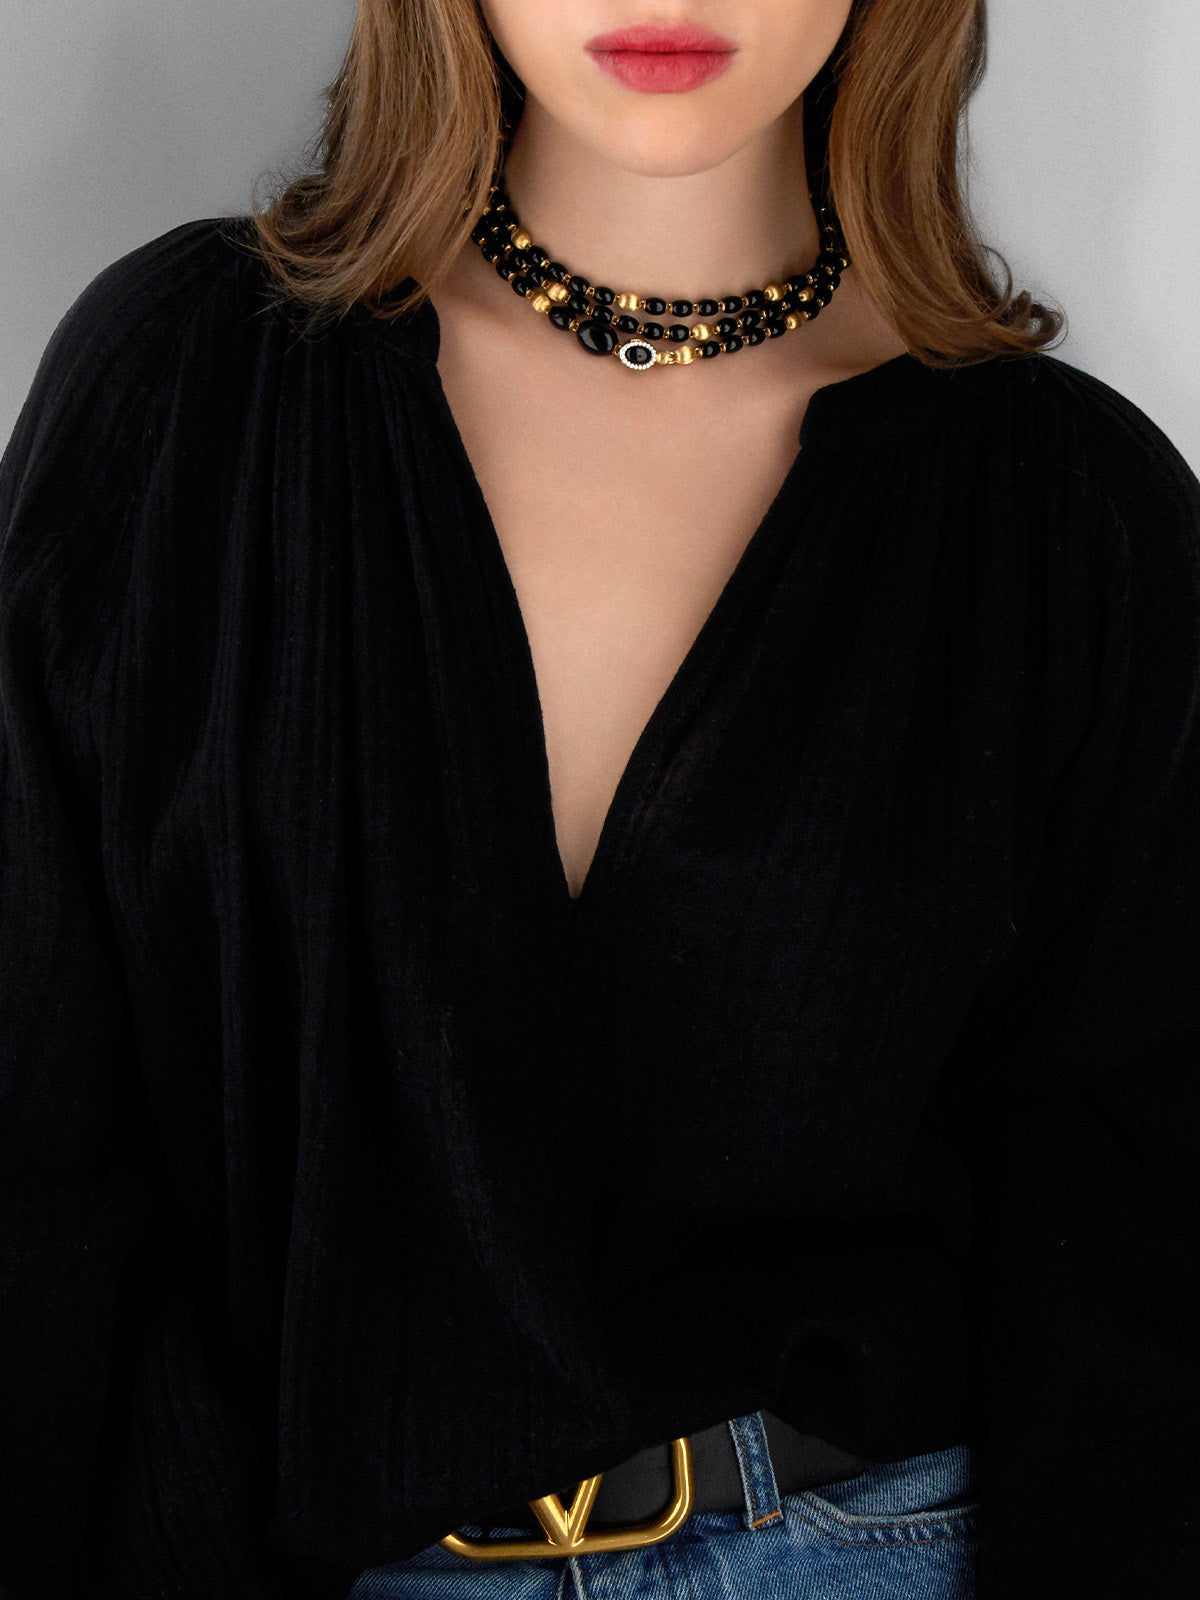 Ivy "Mystery Black" Gold, Diamonds and Black Onyx Statement Convertible Necklace